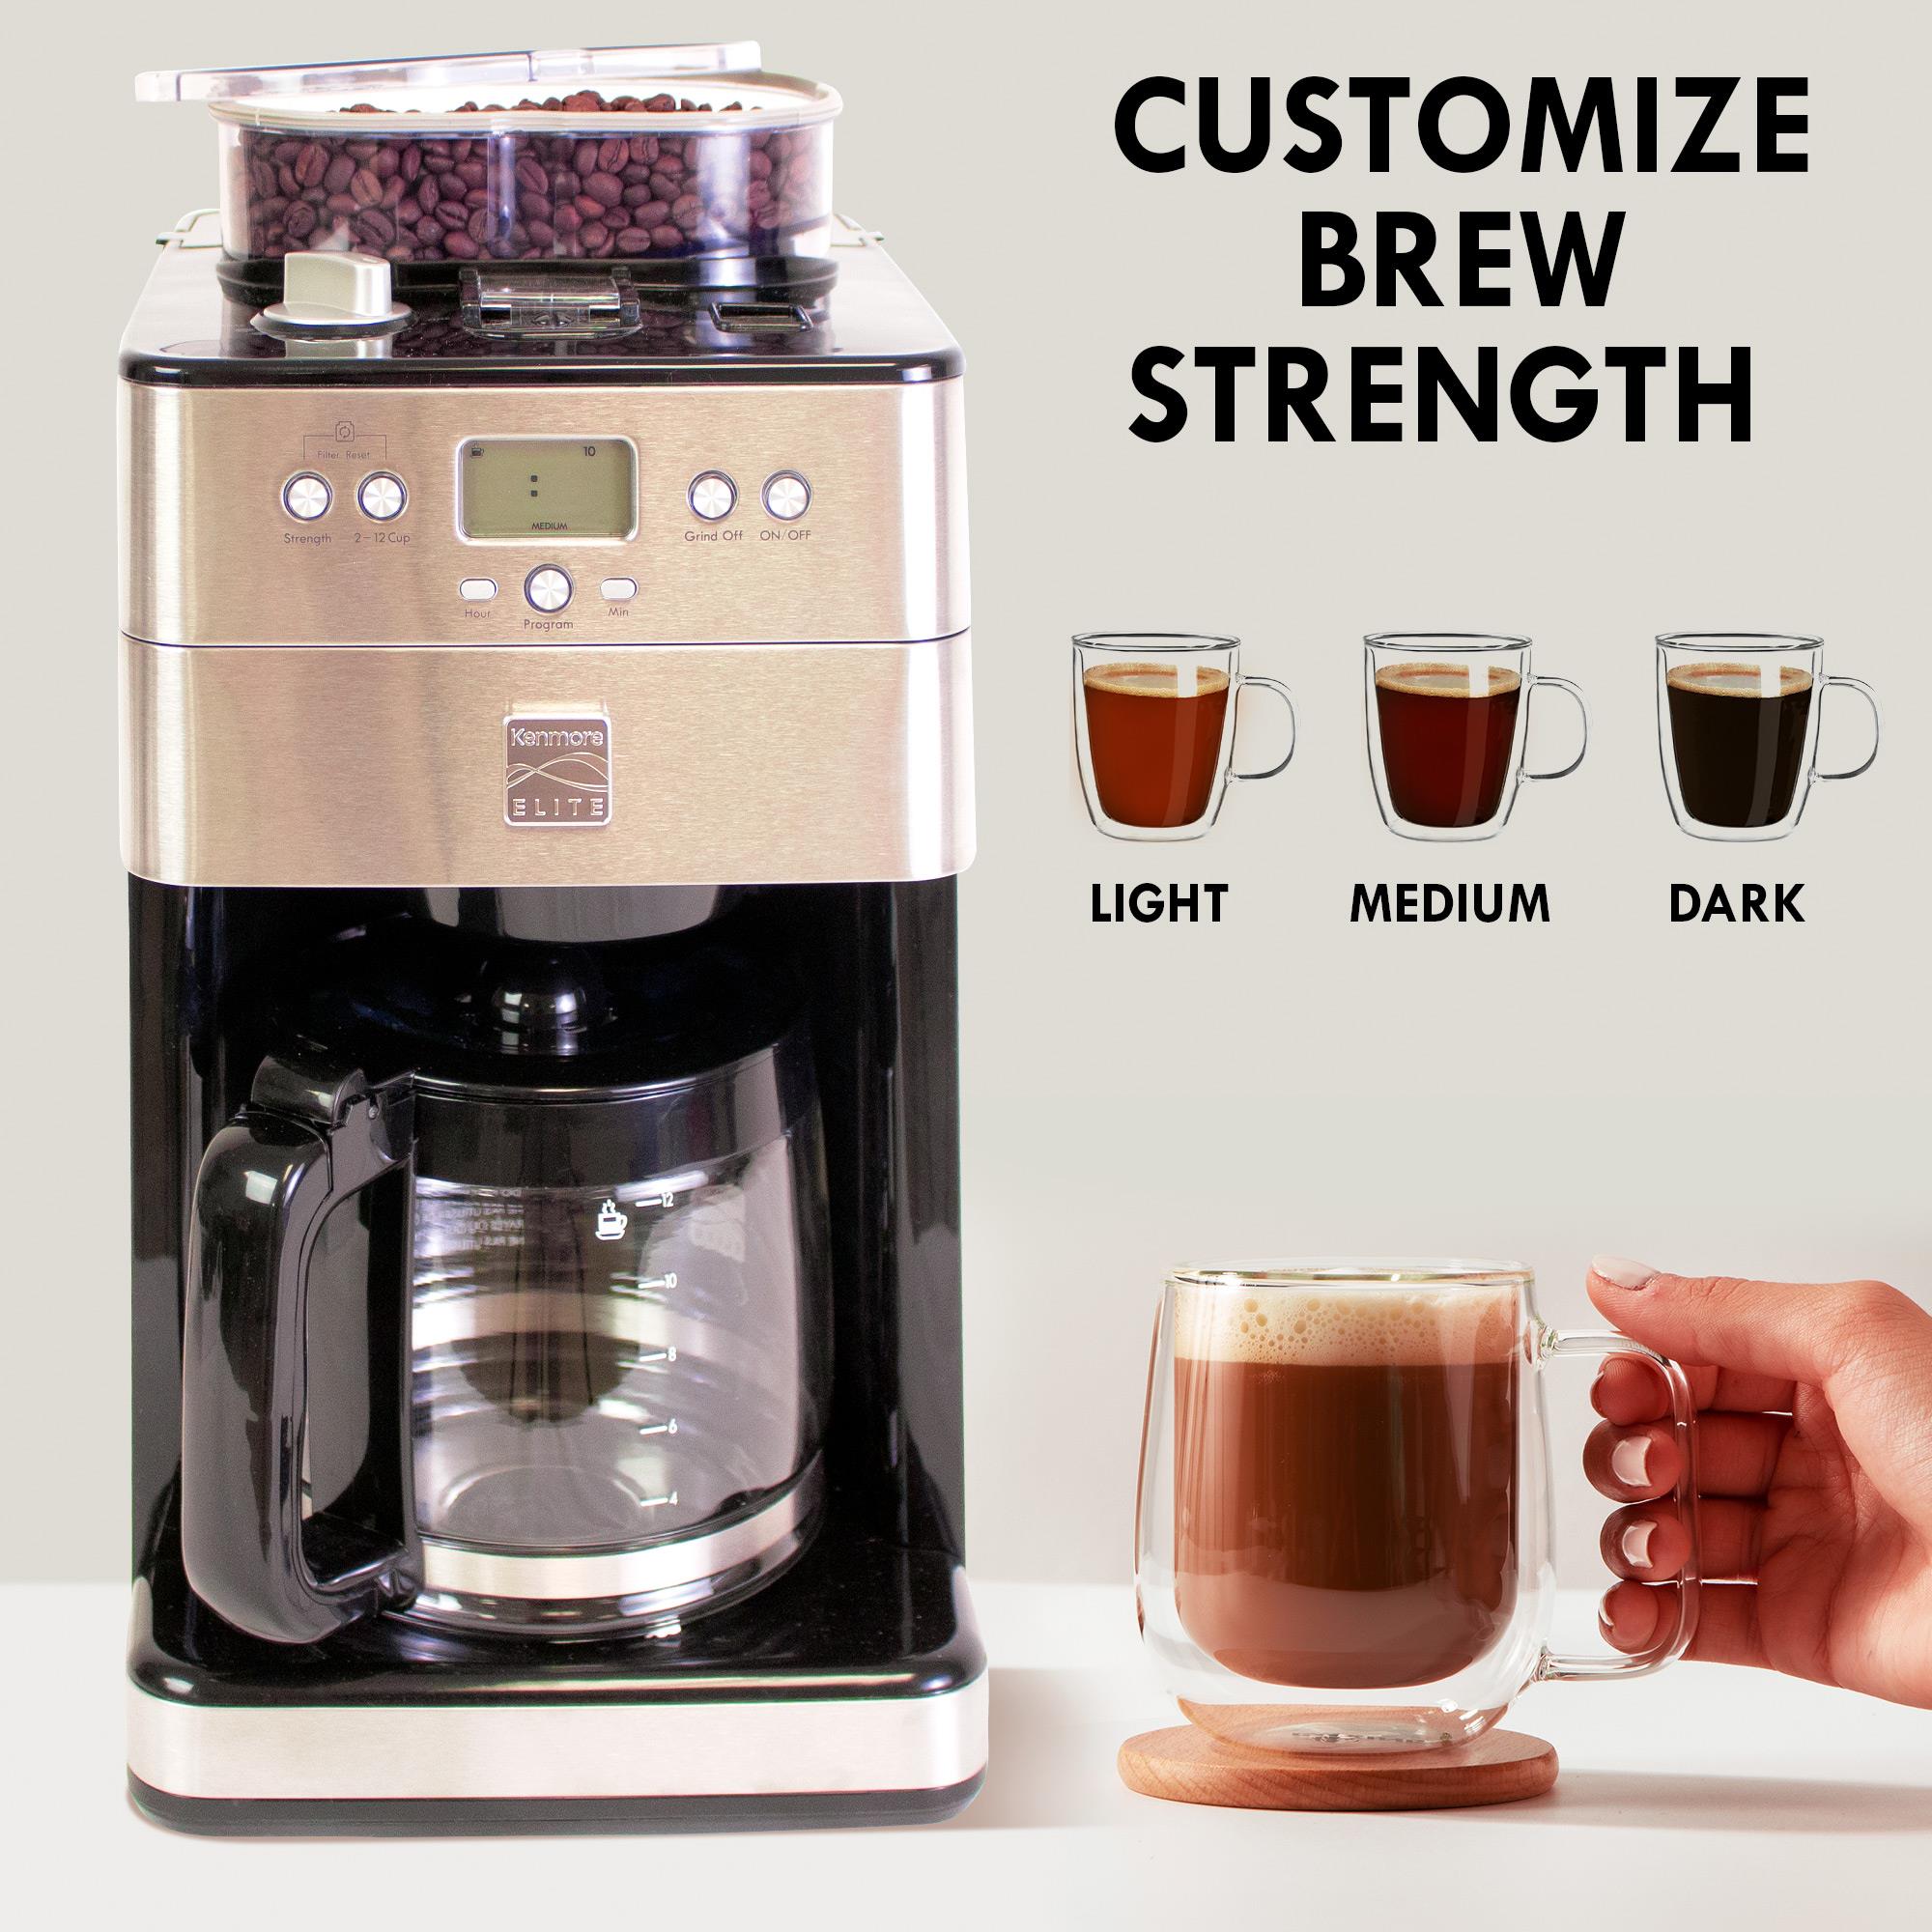 Review Black + Decker Mill & Brew 12 Cup Coffee Maker 